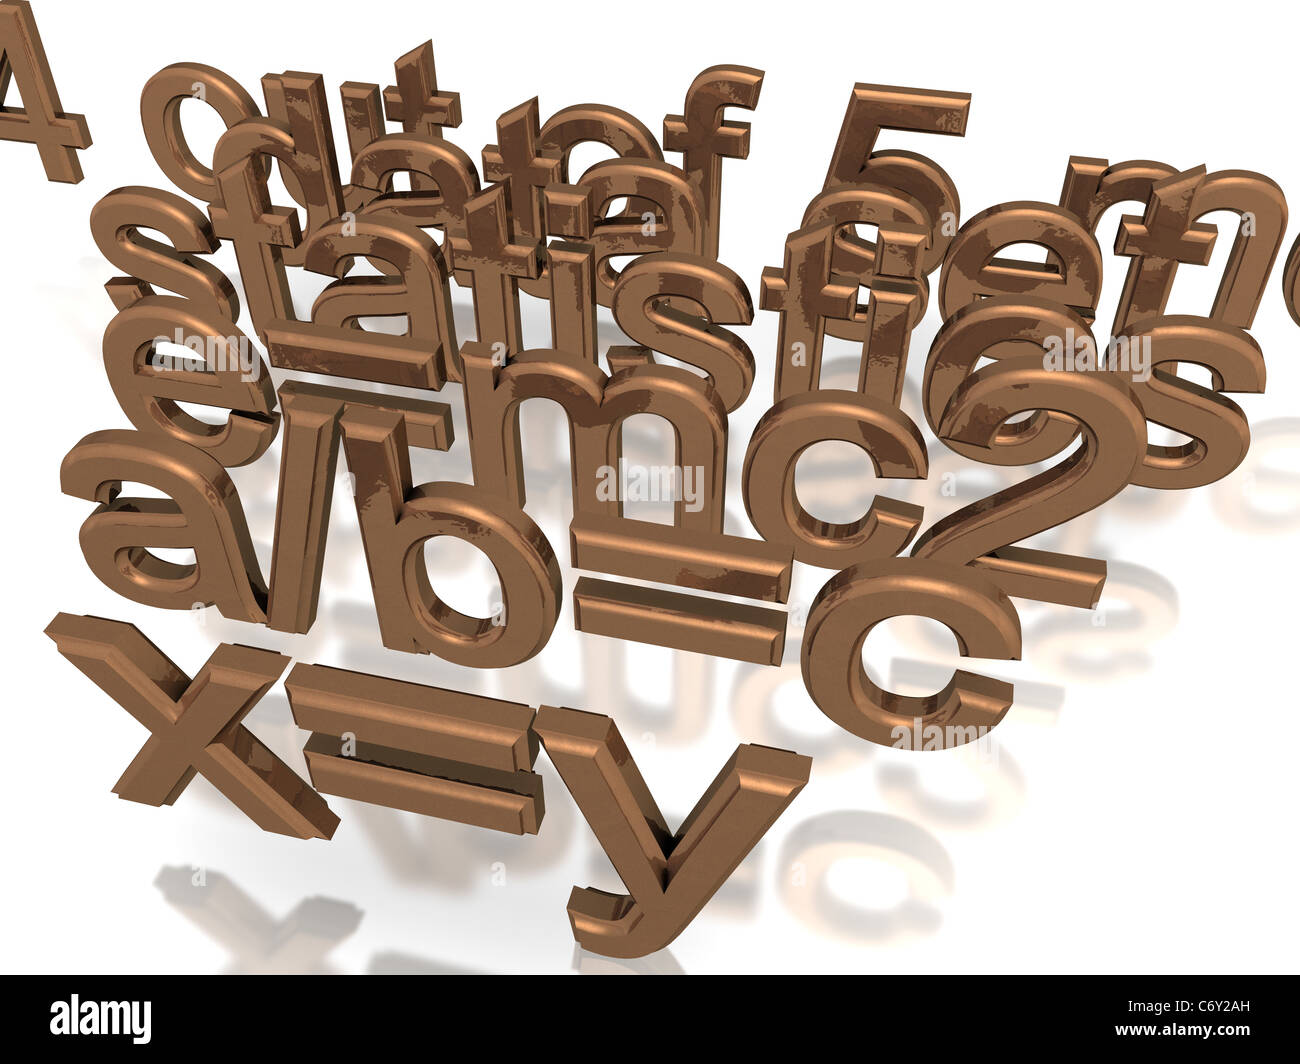 3D text of different math and statistics formulas Stock Photo